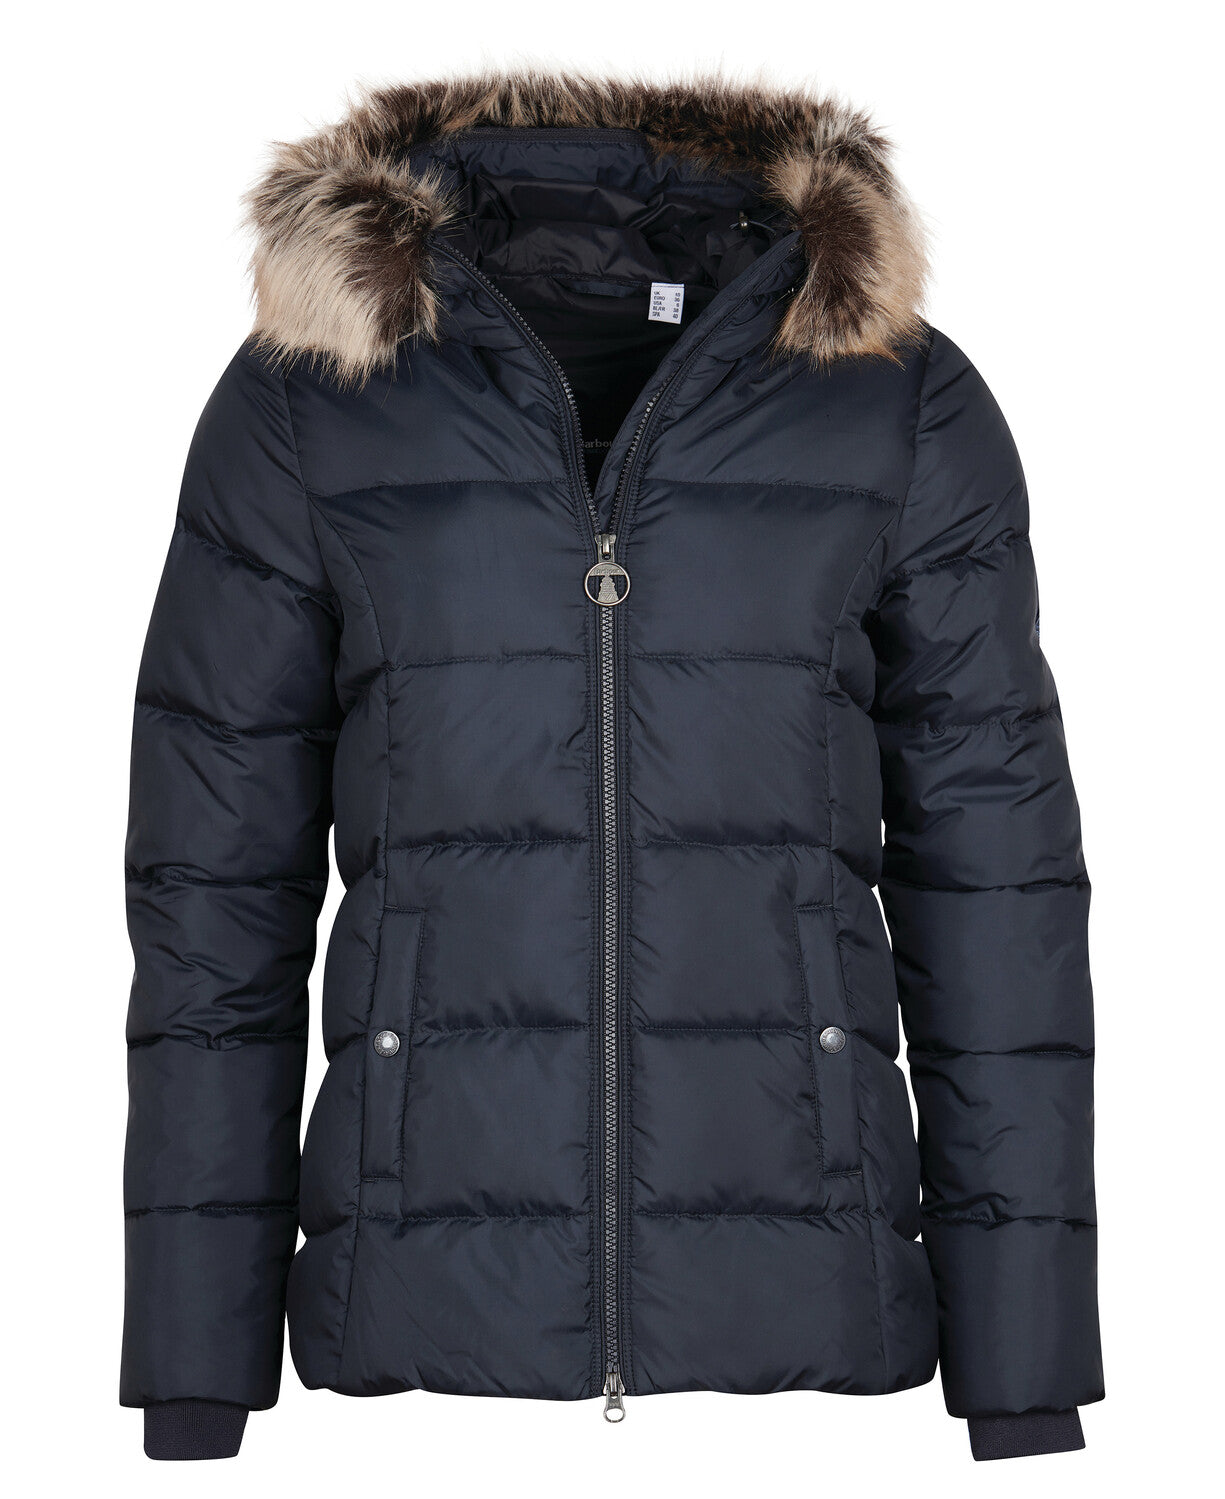 Barbour Midhurst Quilted Jacket